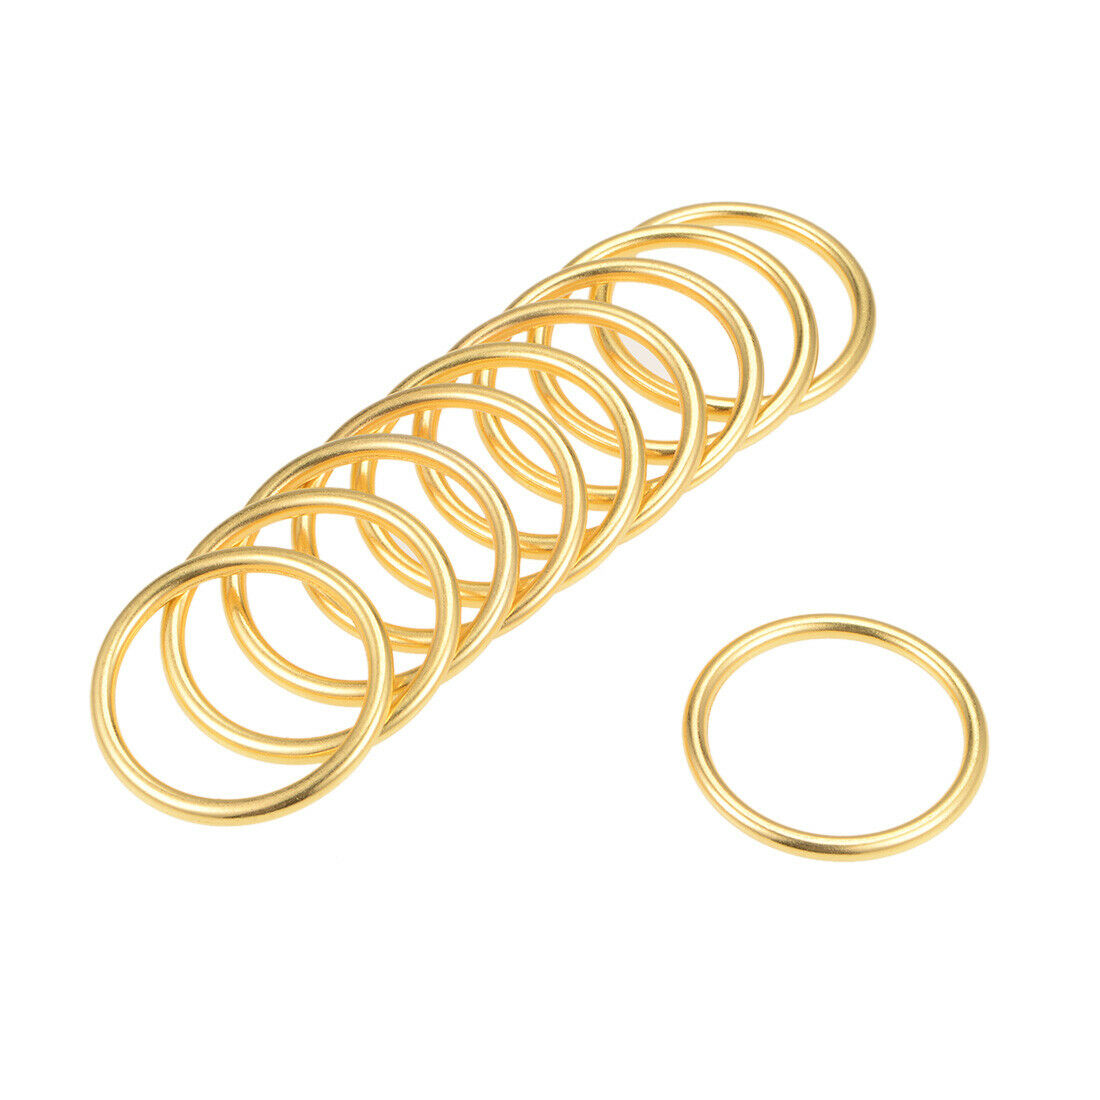 10 Pcs O Ring Buckle 1.2"(30mm) O-rings Gold Tone For Hardware Bags Craft Diy